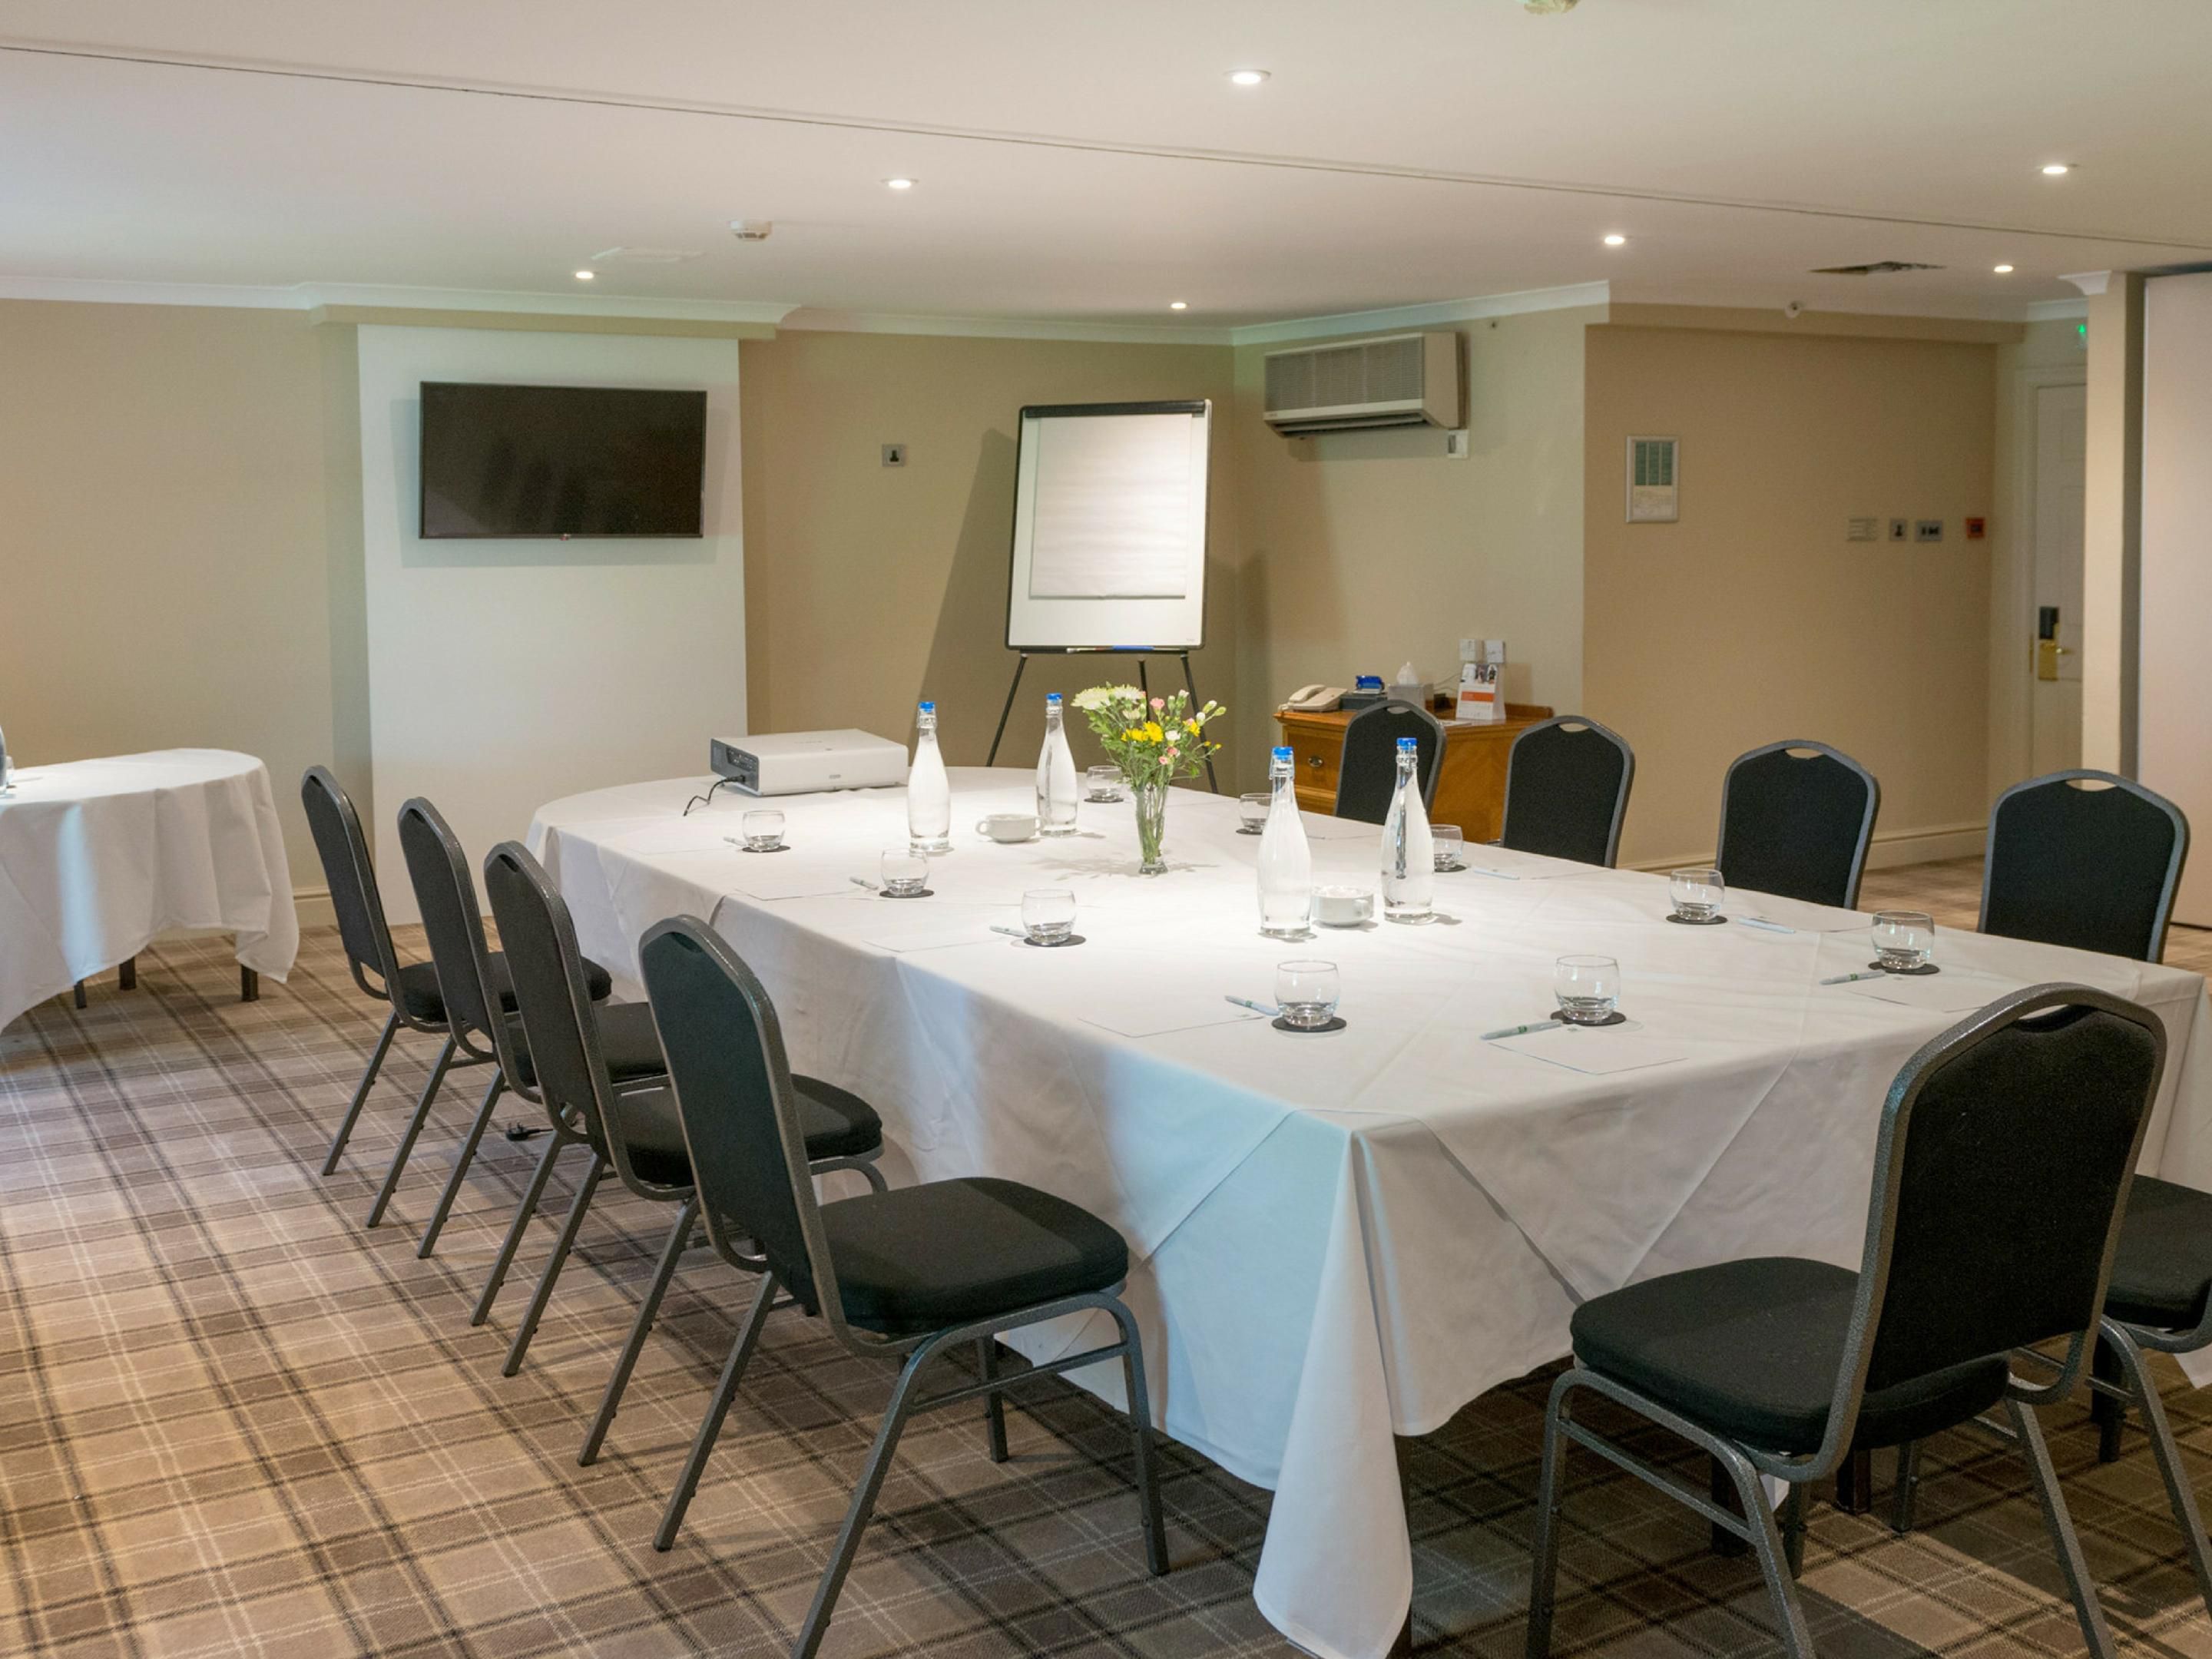 Looking for the perfect venue to host your next meeting? With us, you can build your ideal package and our experienced staff will ensure your meeting runs smoothly.